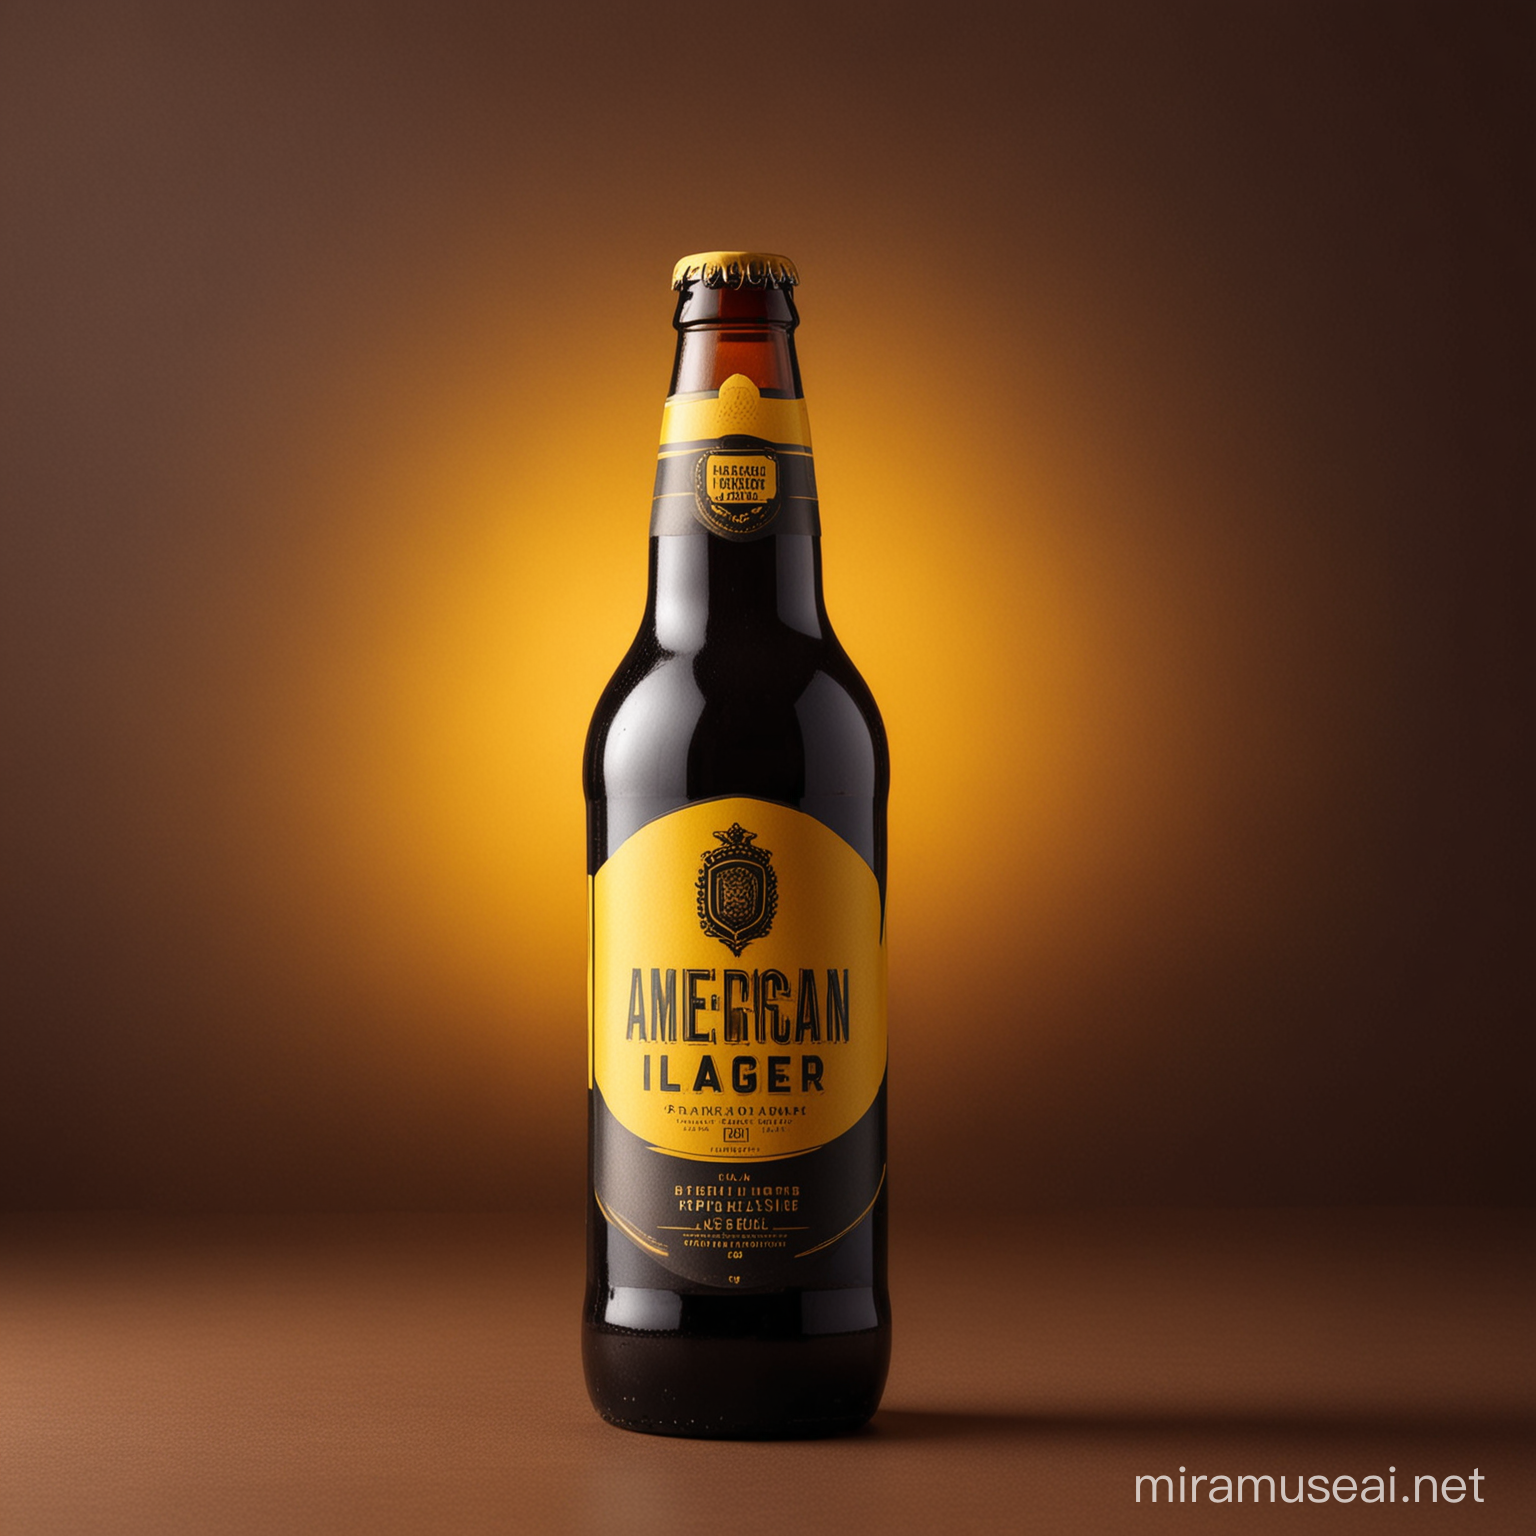 Craft Brewery Showcasing American Dark Lager in Vibrant Yellow Setting